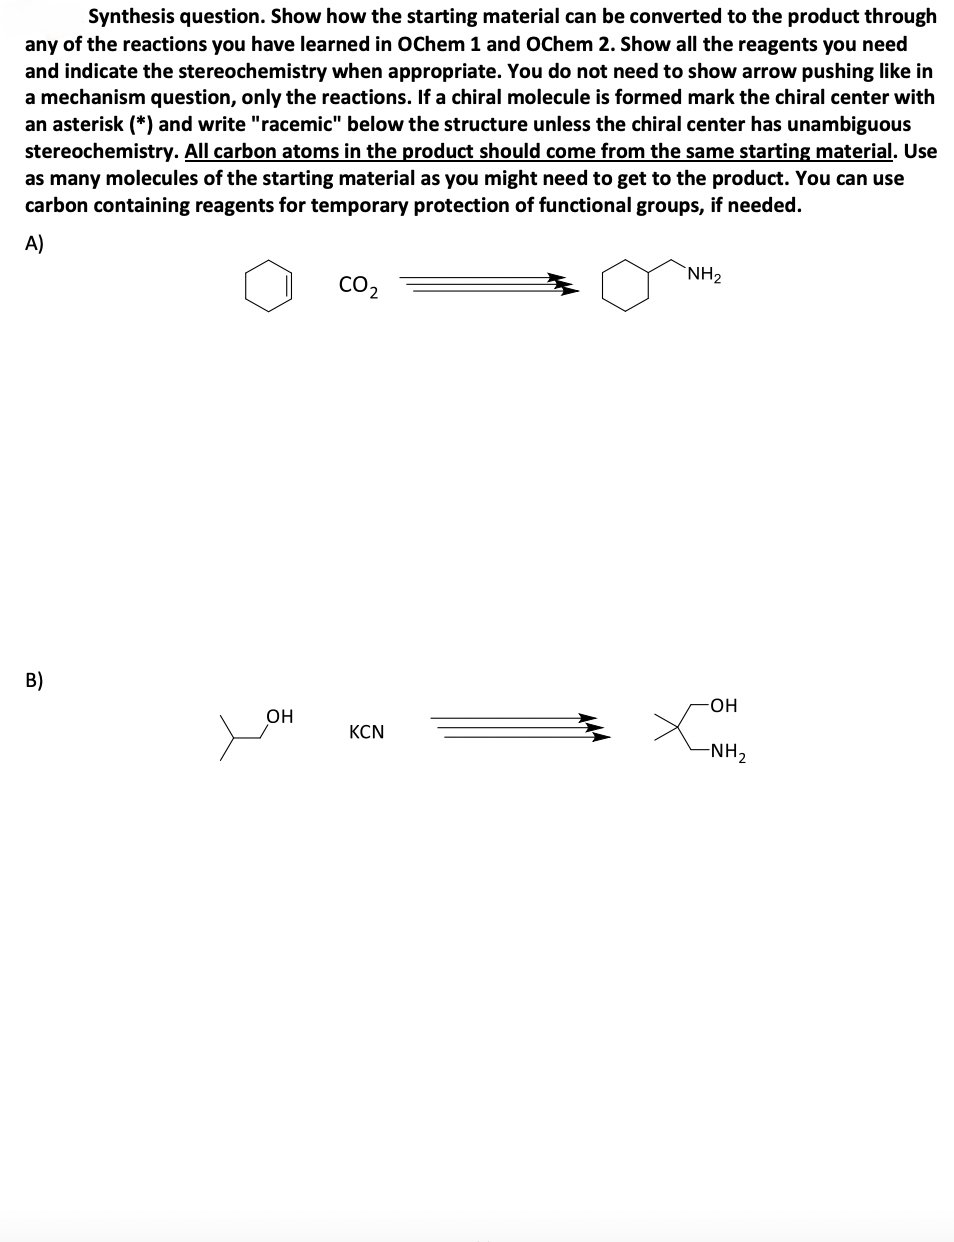 Synthesis question. Show how the starting material can be converted to the product through
any of the reactions you have learned in OChem 1 and OChem 2. Show all the reagents you need
and indicate the stereochemistry when appropriate. You do not need to show arrow pushing like in
a mechanism question, only the reactions. If a chiral molecule is formed mark the chiral center with
an asterisk (*) and write "racemic" below the structure unless the chiral center has unambiguous
stereochemistry. All carbon atoms in the product should come from the same starting material. Use
as many molecules of the starting material as you might need to get to the product. You can use
carbon containing reagents for temporary protection of functional groups, if needed.
A)
B)
CO2
NH₂
-OH
OH
KCN
-NH2